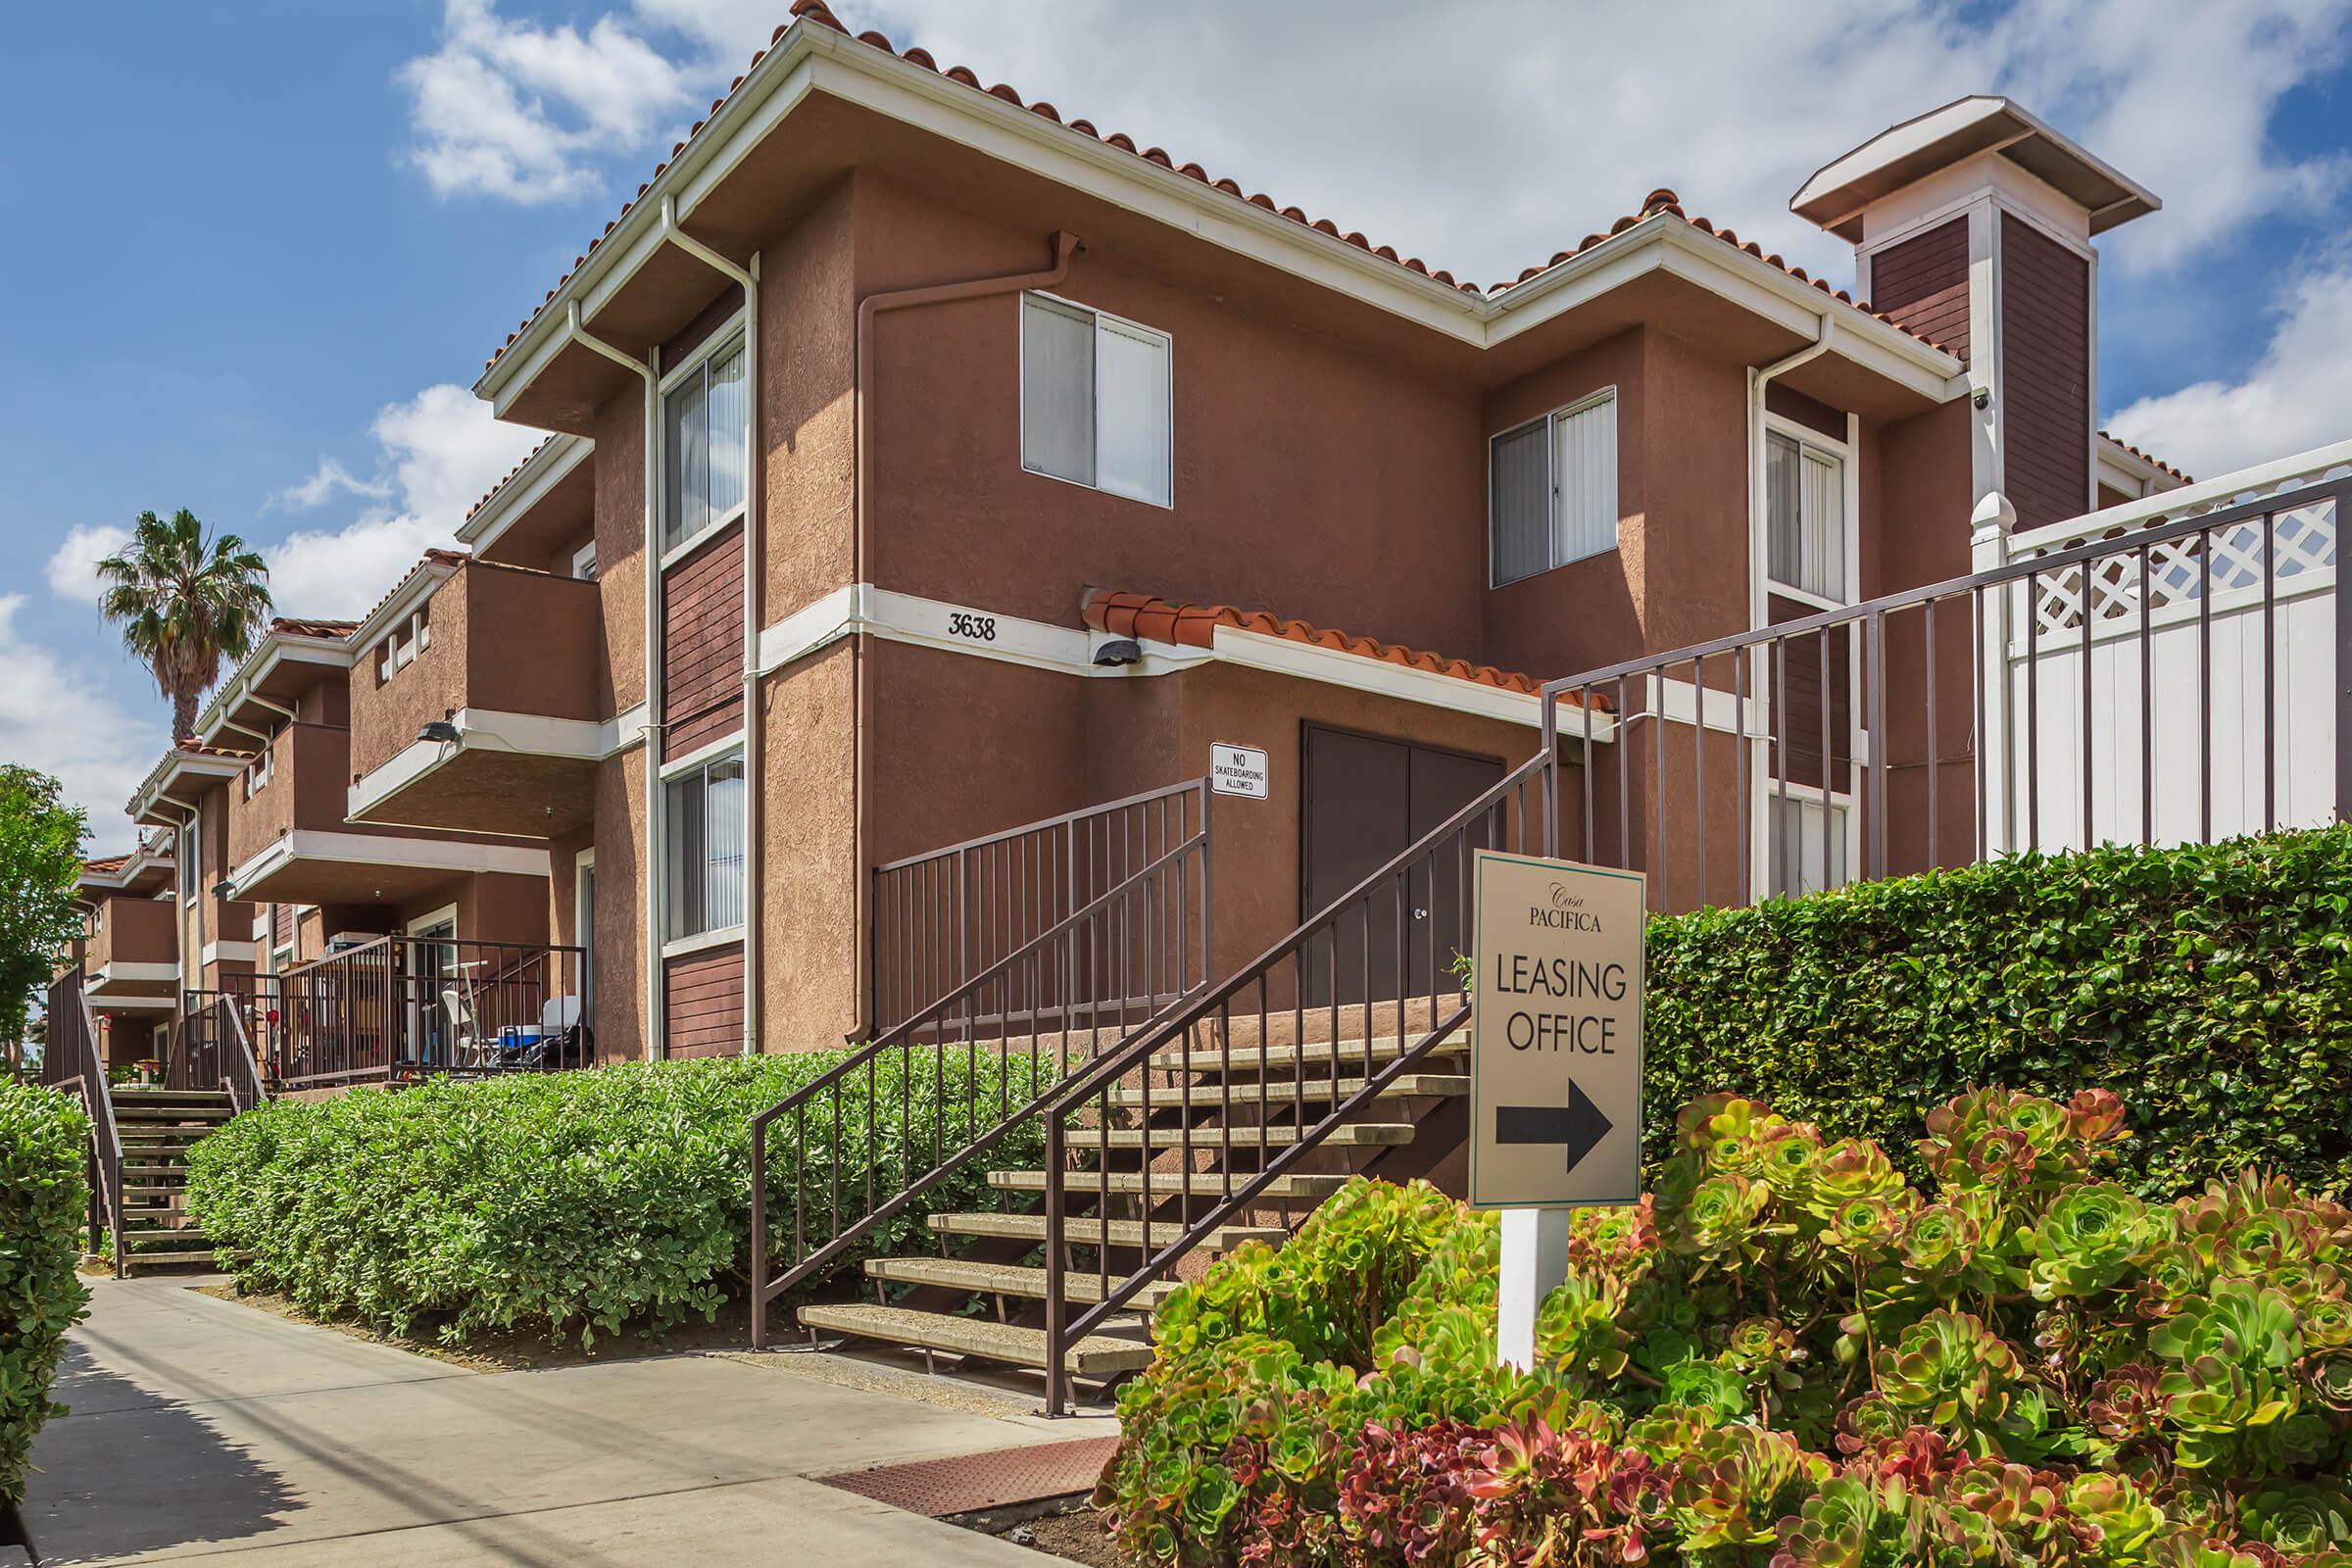 Casa Pacifica Apartment Homes community building with leasing office sign